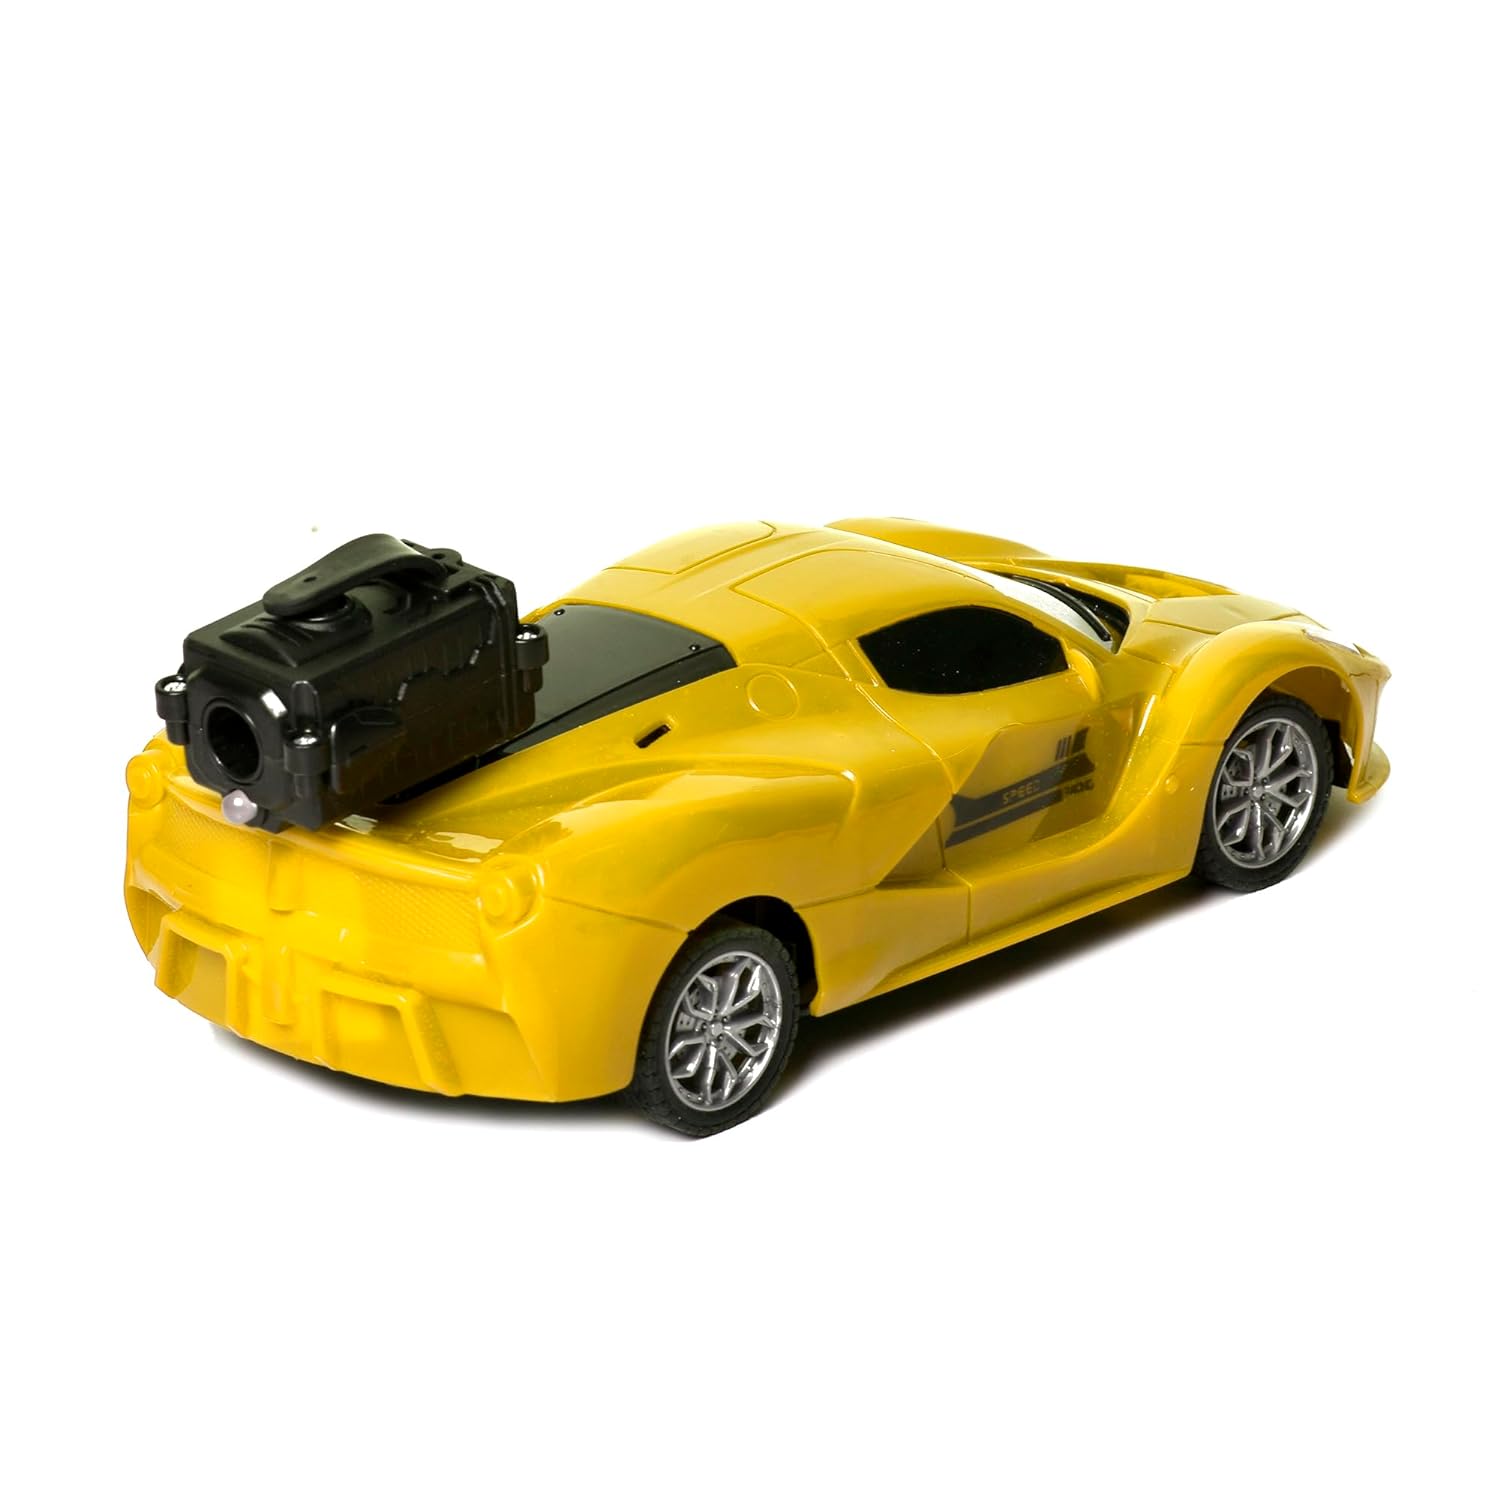 Braintastic Model Diecast Car Toy Vehicle Pull Back Friction Car with Openable Doors Light & Music Toys for Kids Age 3+ Years (Spray Car Yellow)